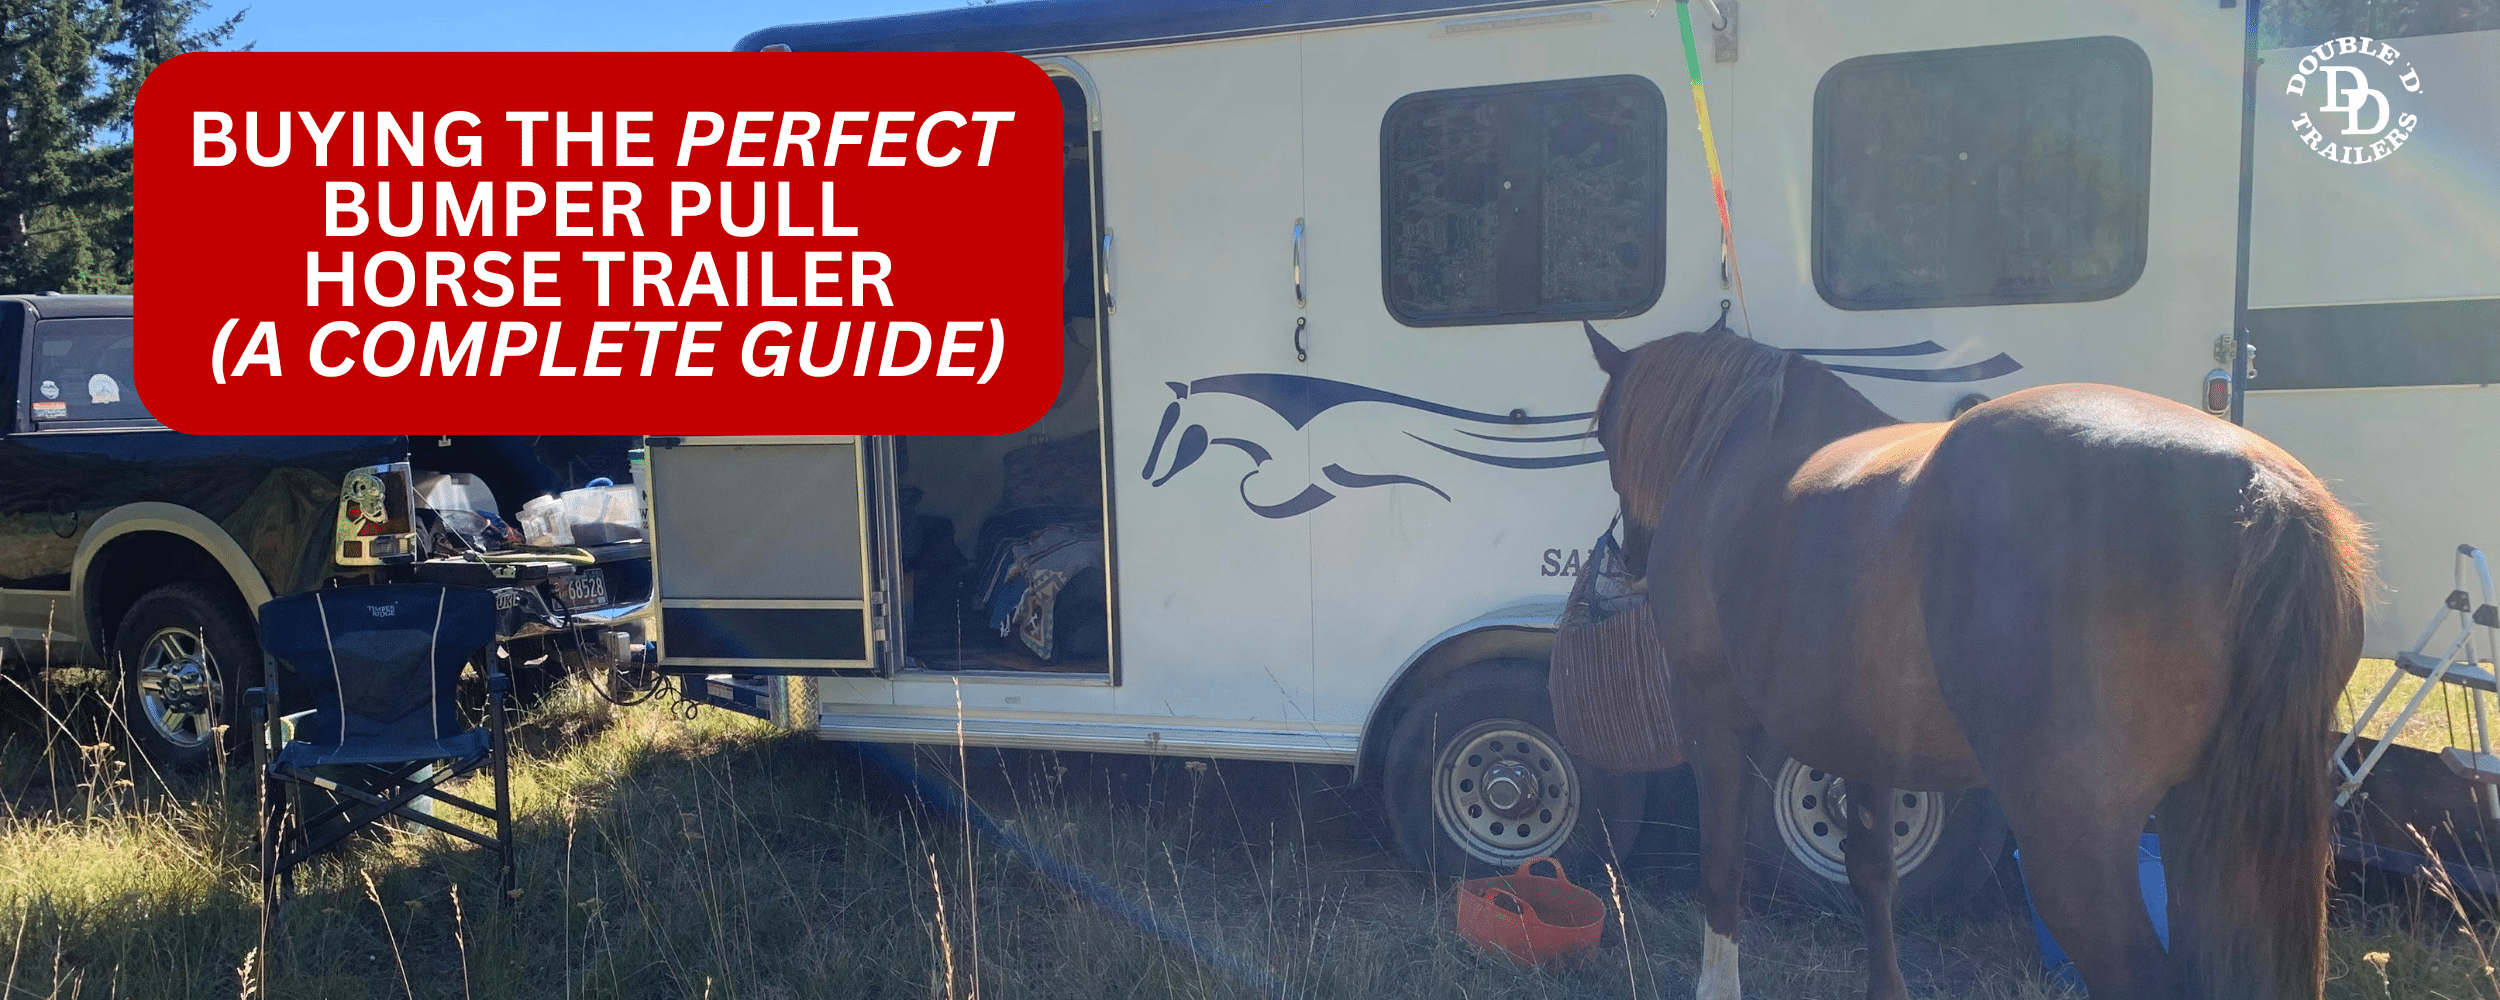 Buying the Perfect Bumper Pull Horse Trailer (A Complete Guide) from Double D Trailers